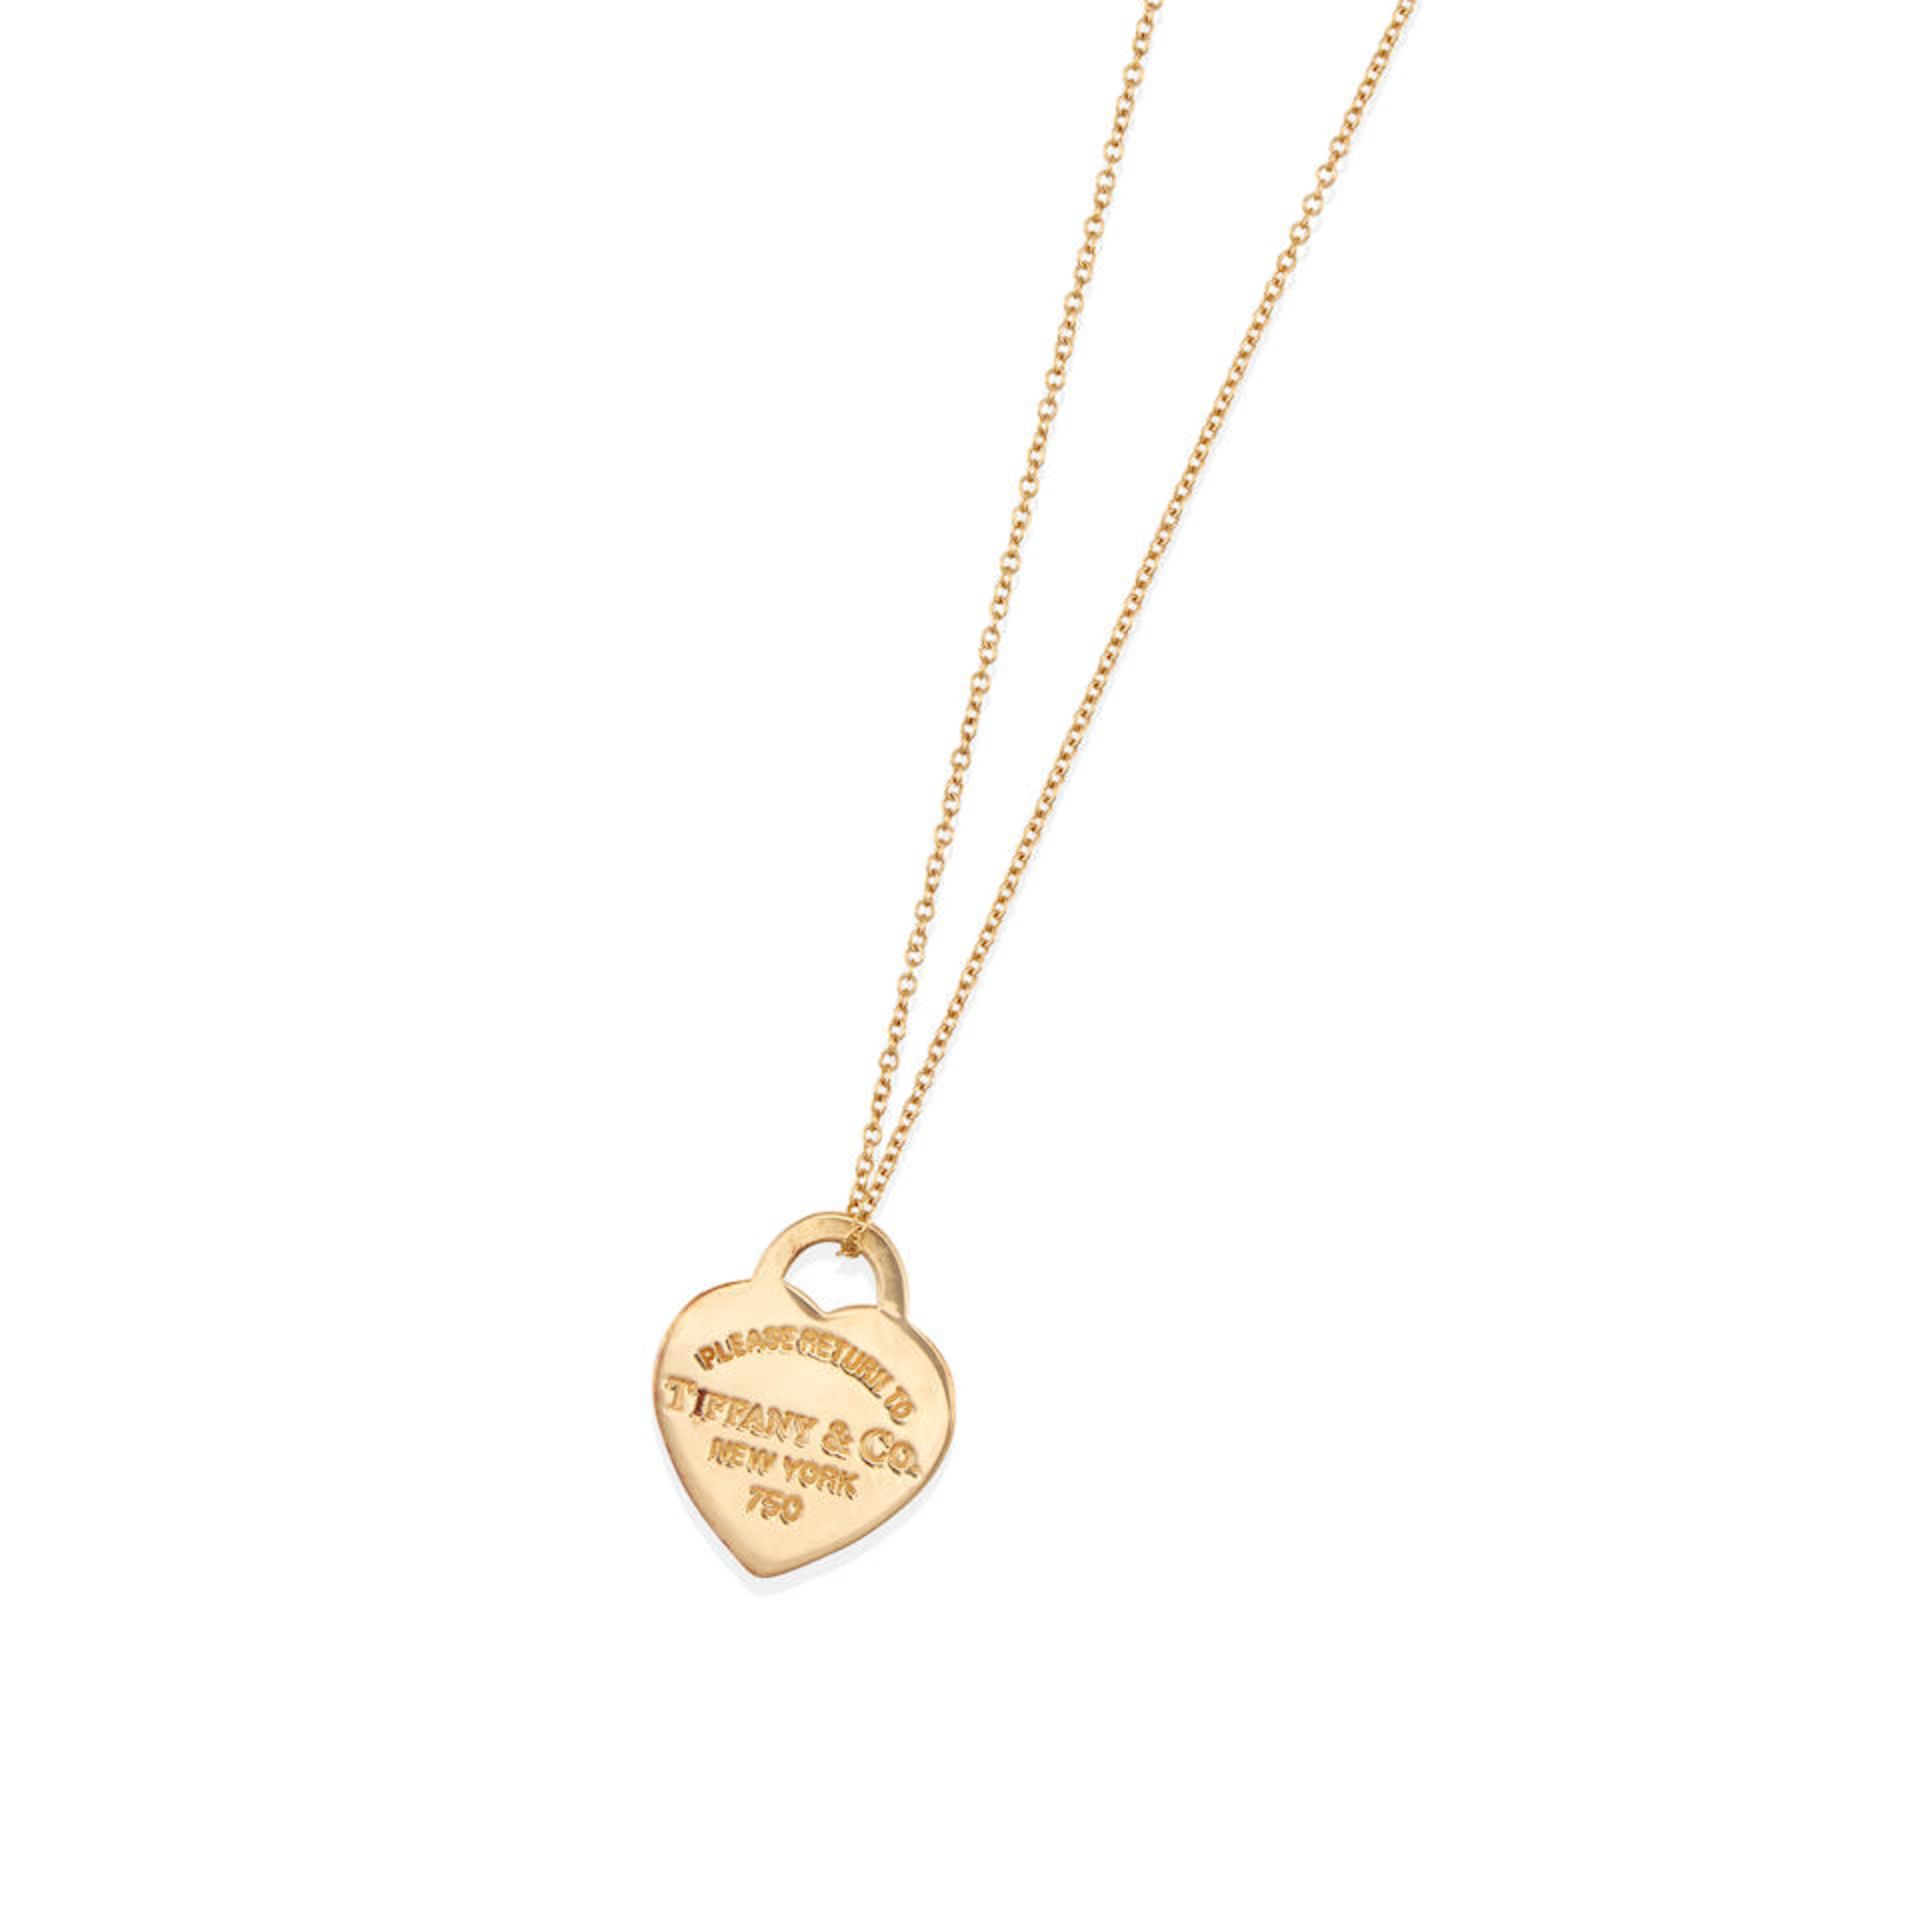 TIFFANY & CO.: AN 18K 'RETURN TO TIFFANY' HEART TAG PENDANT AND CHAIN